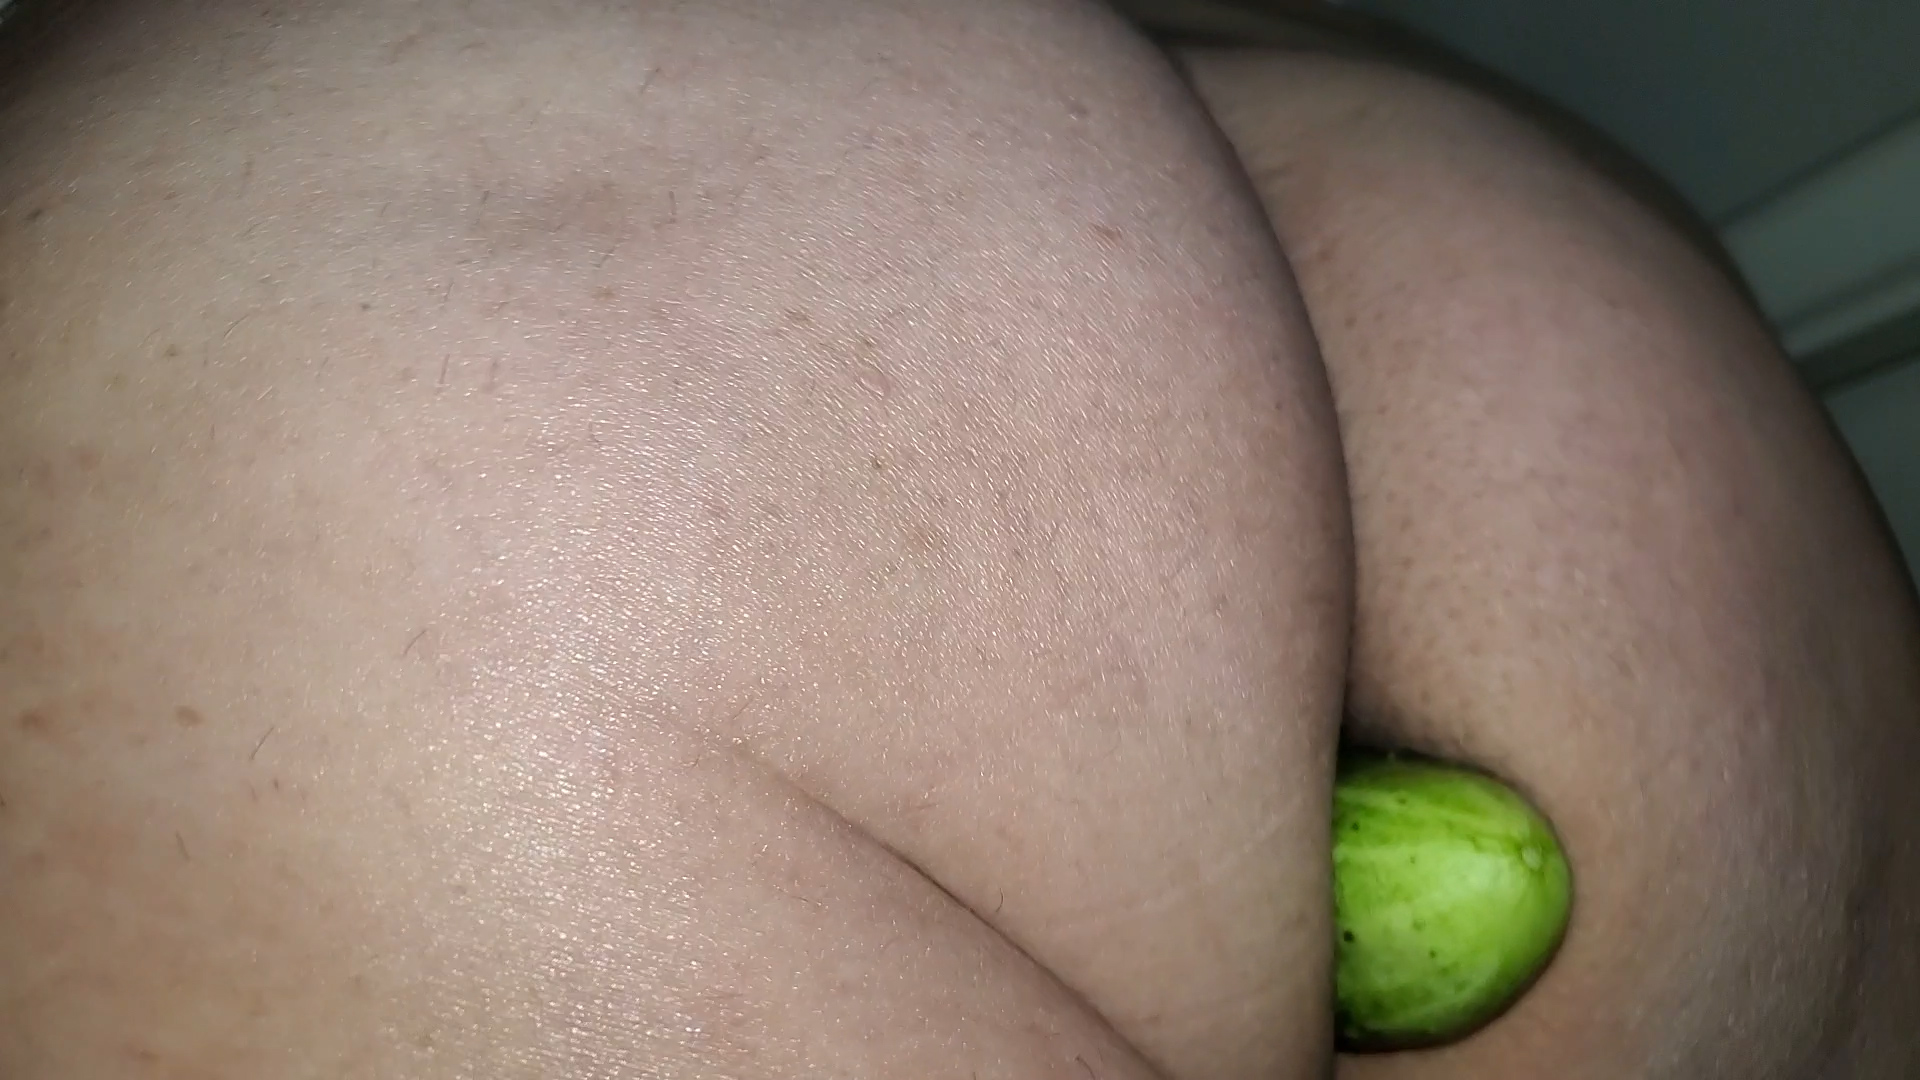 Anal 4 - Trying to Hold Cucumber in My Butt While Walki photo photo